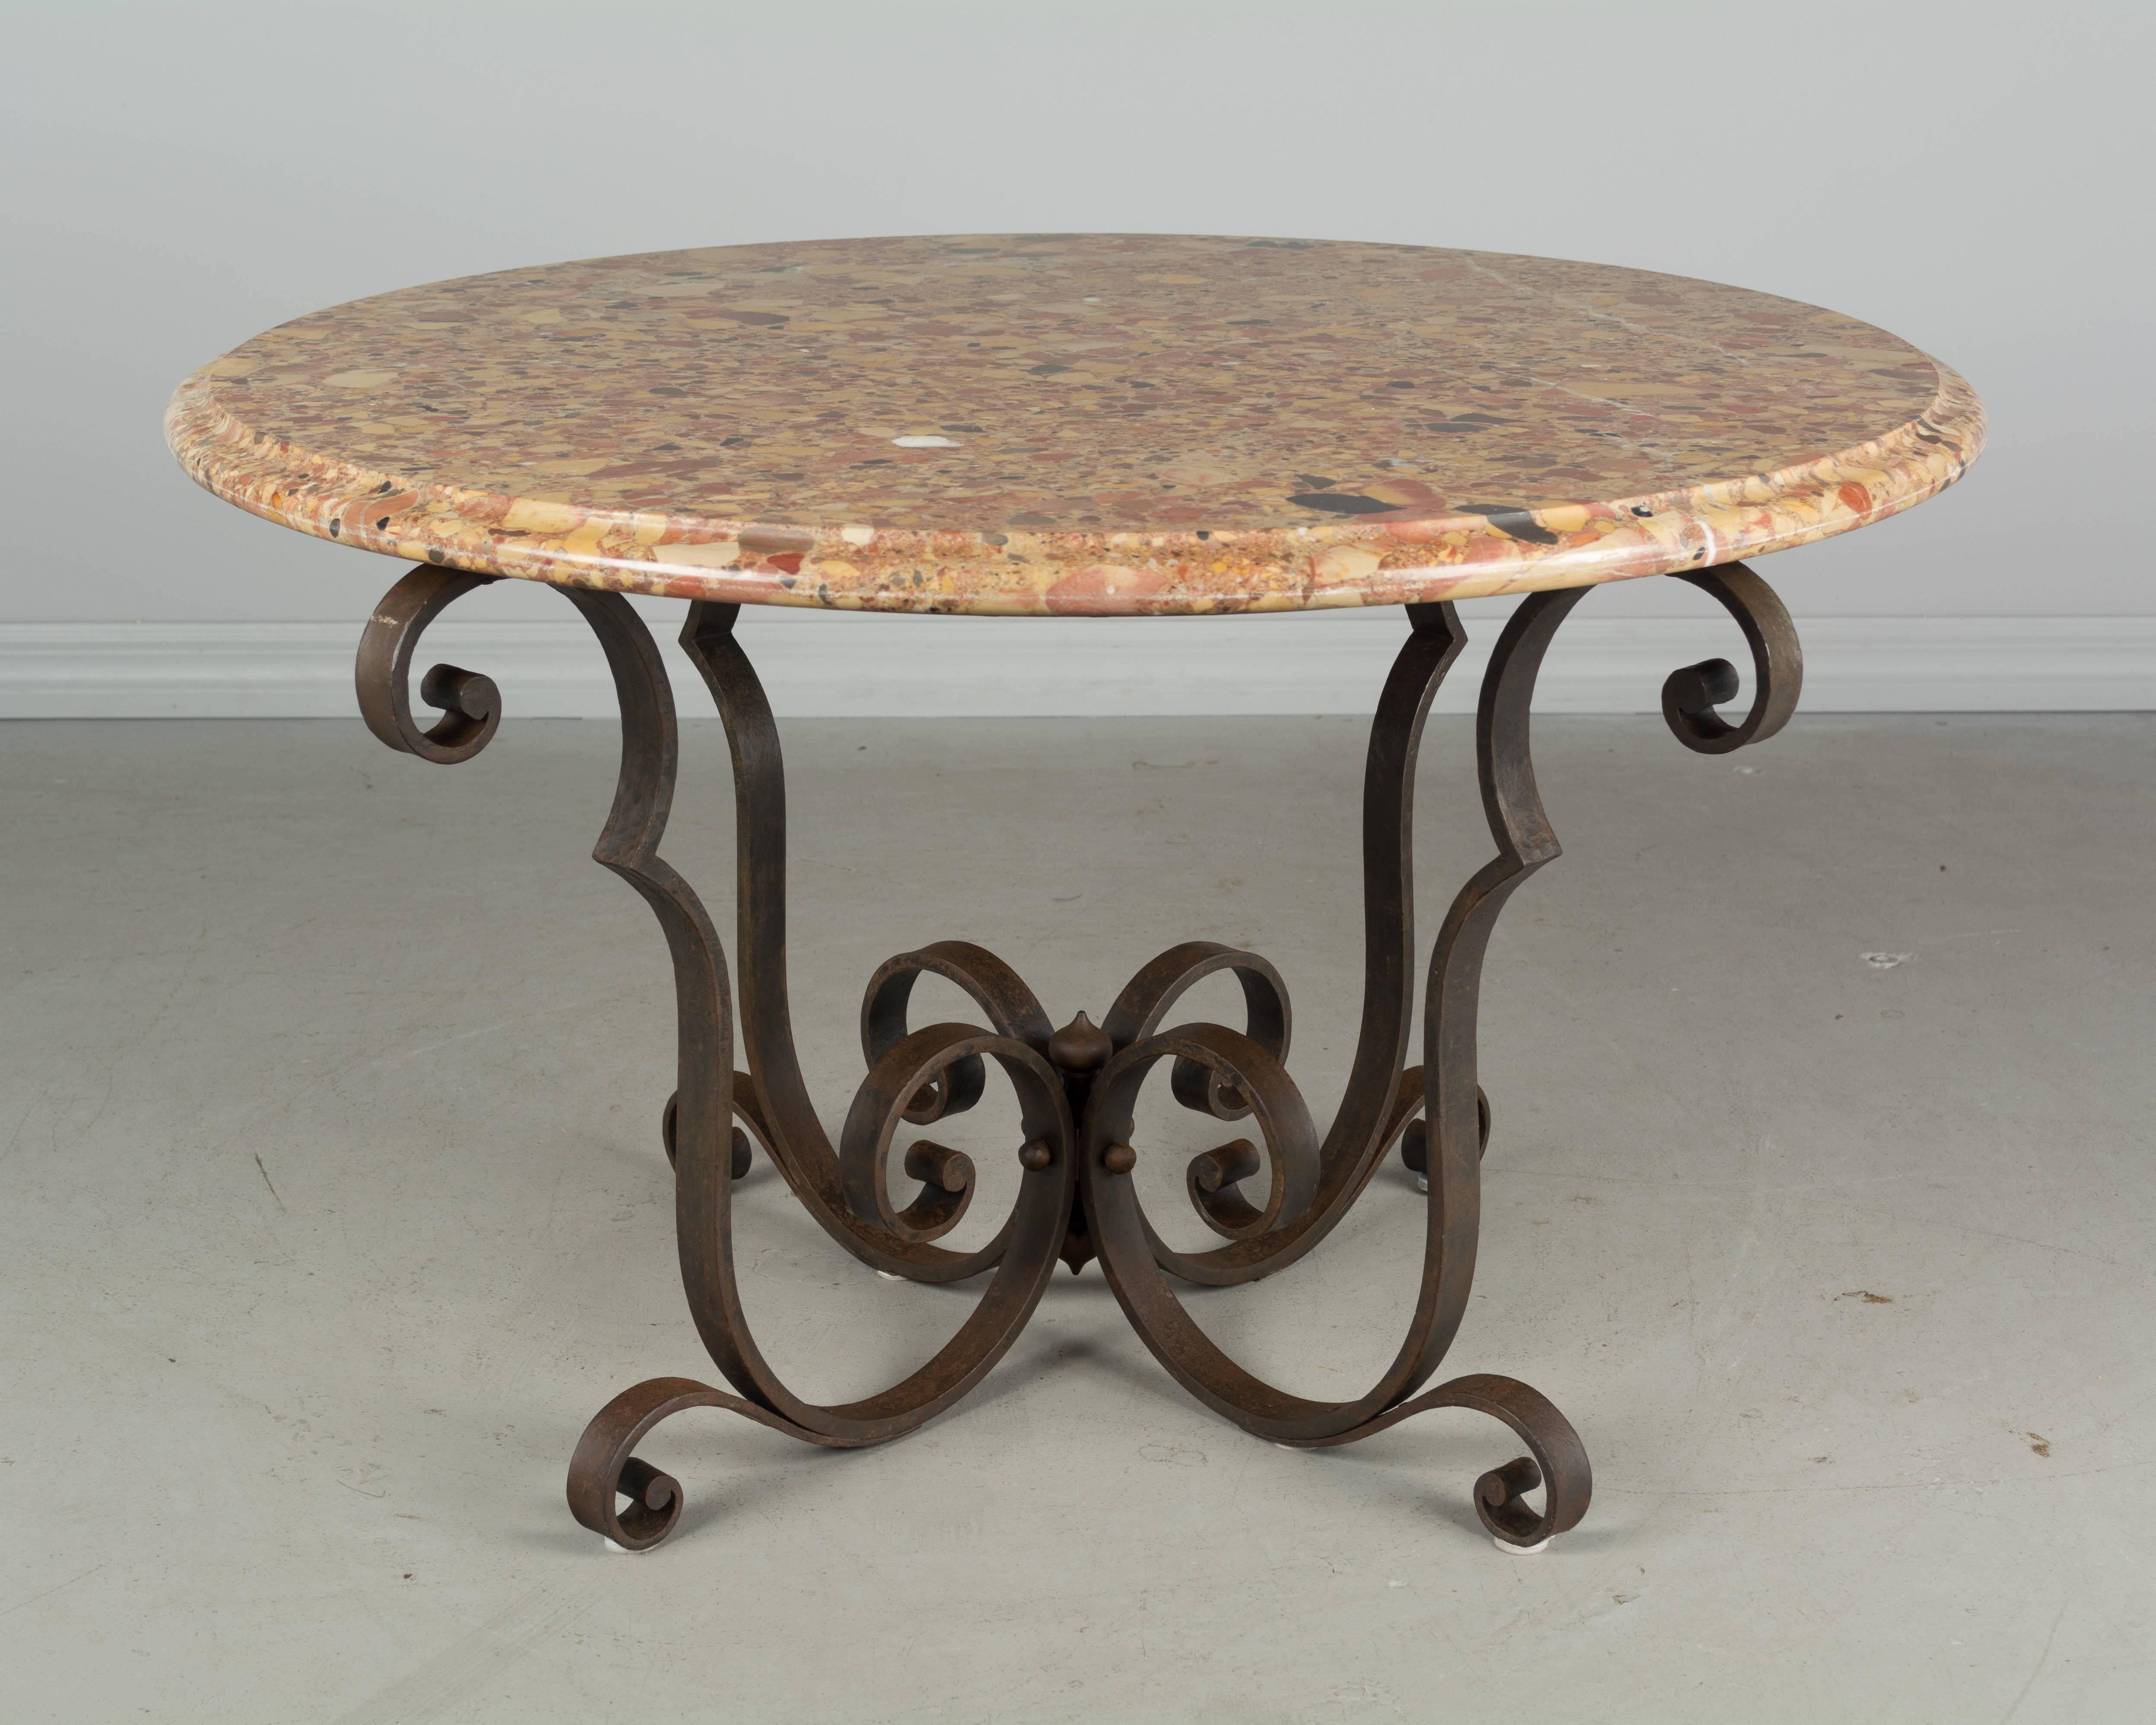 20th Century French Art Deco Wrought Iron Marble-Top Table For Sale